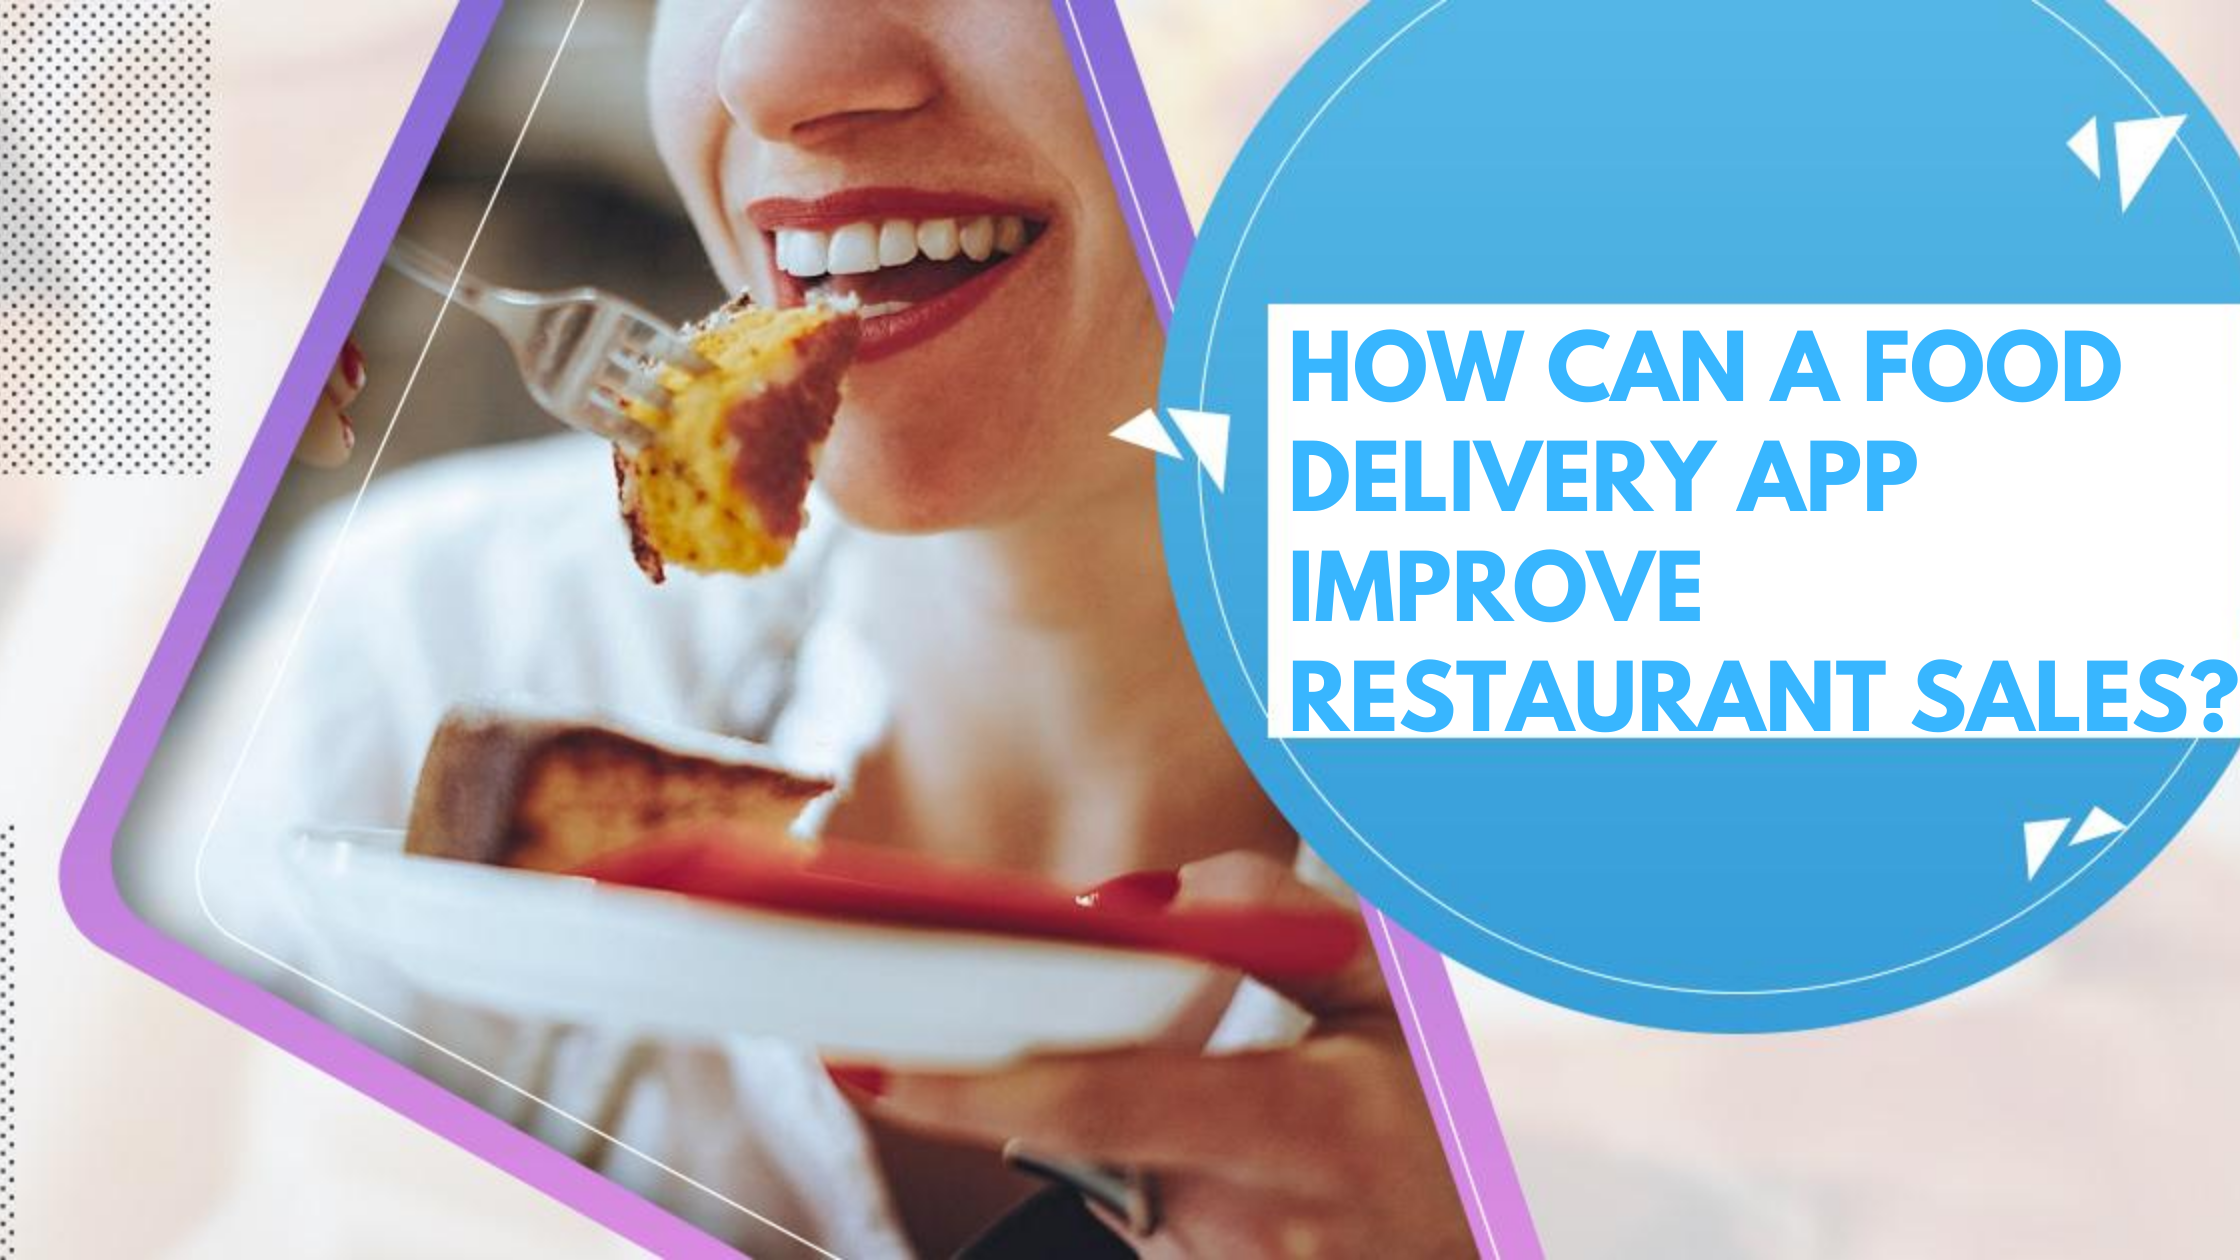 How can a Food Delivery App Improve Restaurant Sales? – Read This to Skyrocket Your Profits